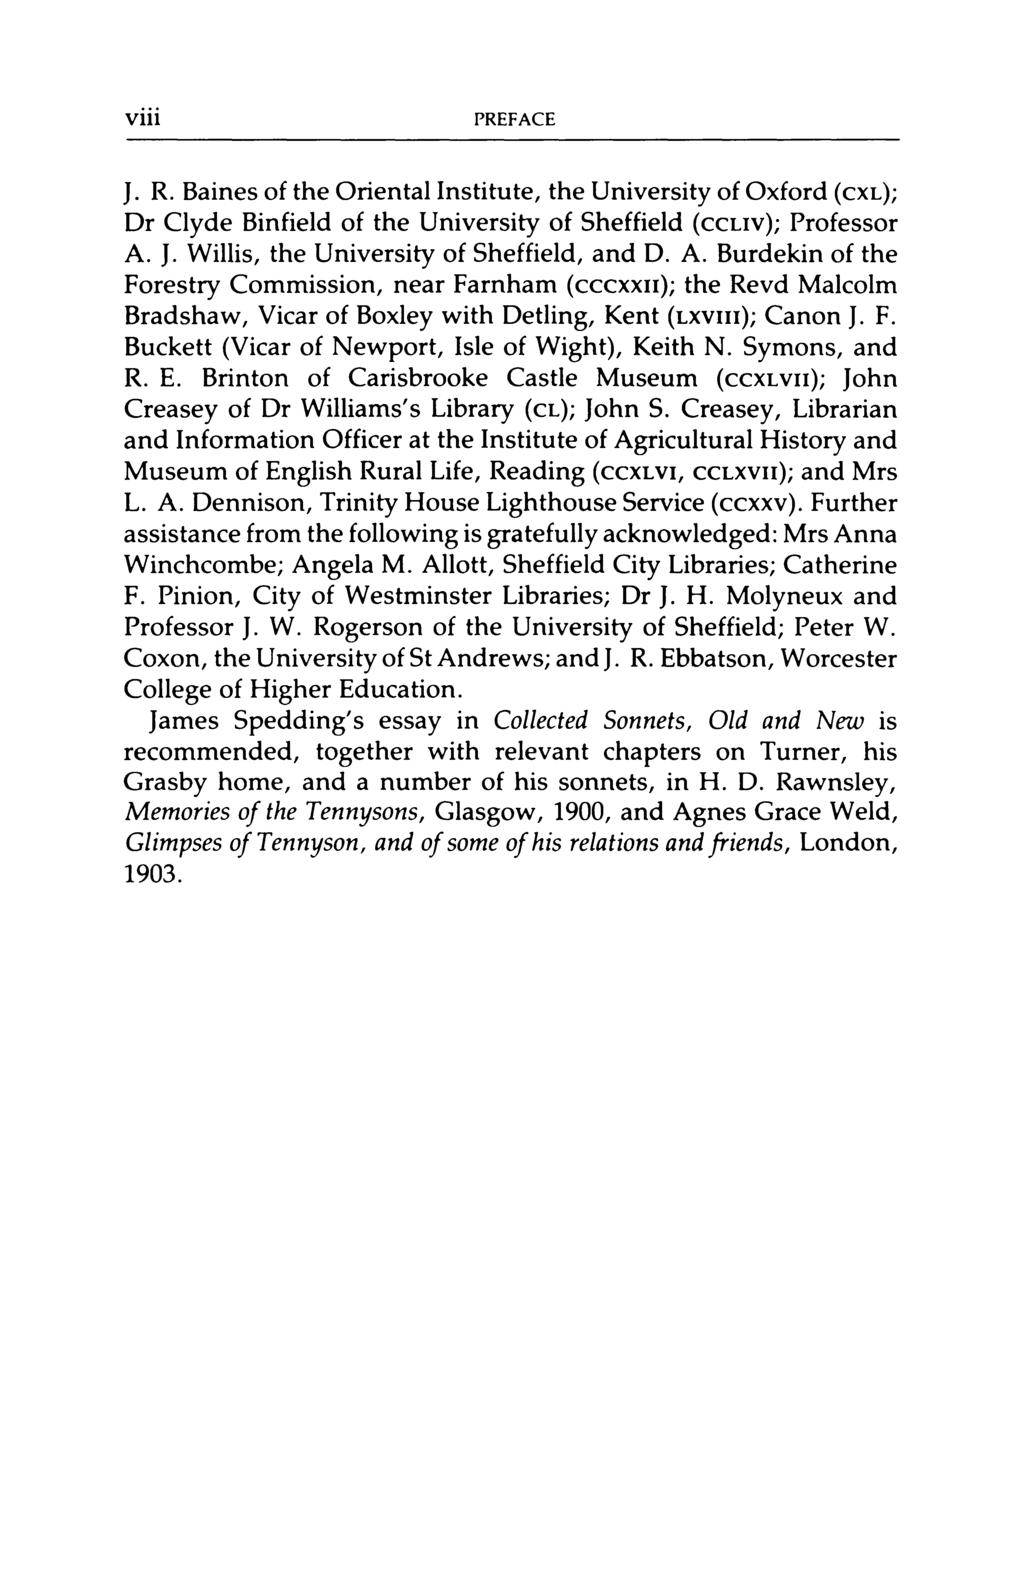 viii PREFACE J. R. Baines of the Oriental Institute, the University of Oxford (cxl); Dr Clyde Binfield of the University of Sheffield (ccuv); Professor A. J. Willis, the University of Sheffield, and D.